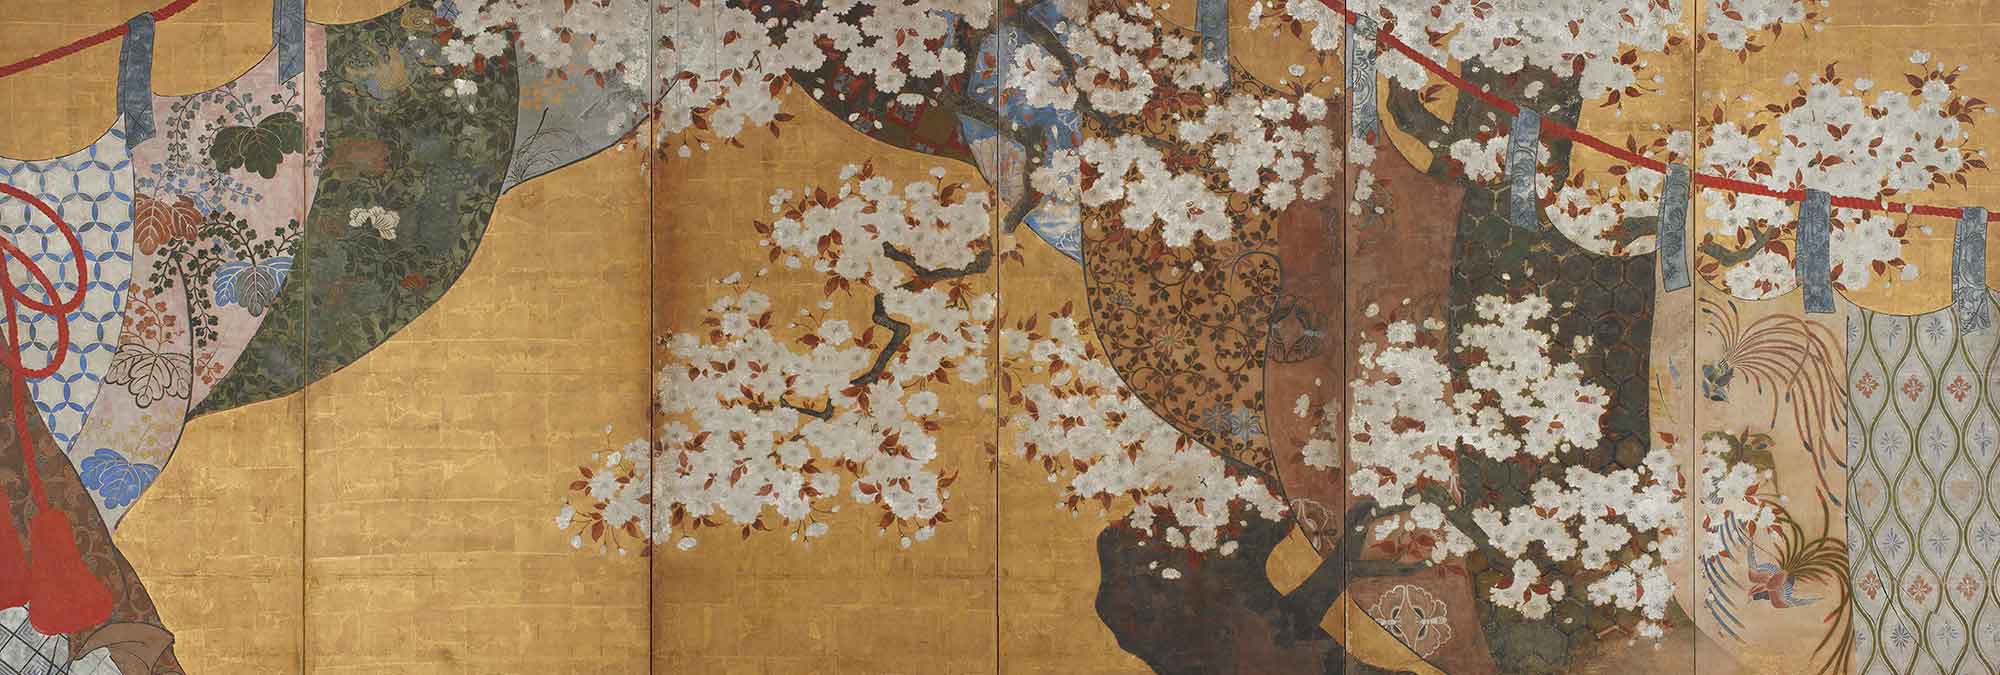 Honor The Tradition Of Viewing Cherry Blossoms In These Signature Japanese Works Of Art At The Smithsonian Smithsonian Magazine